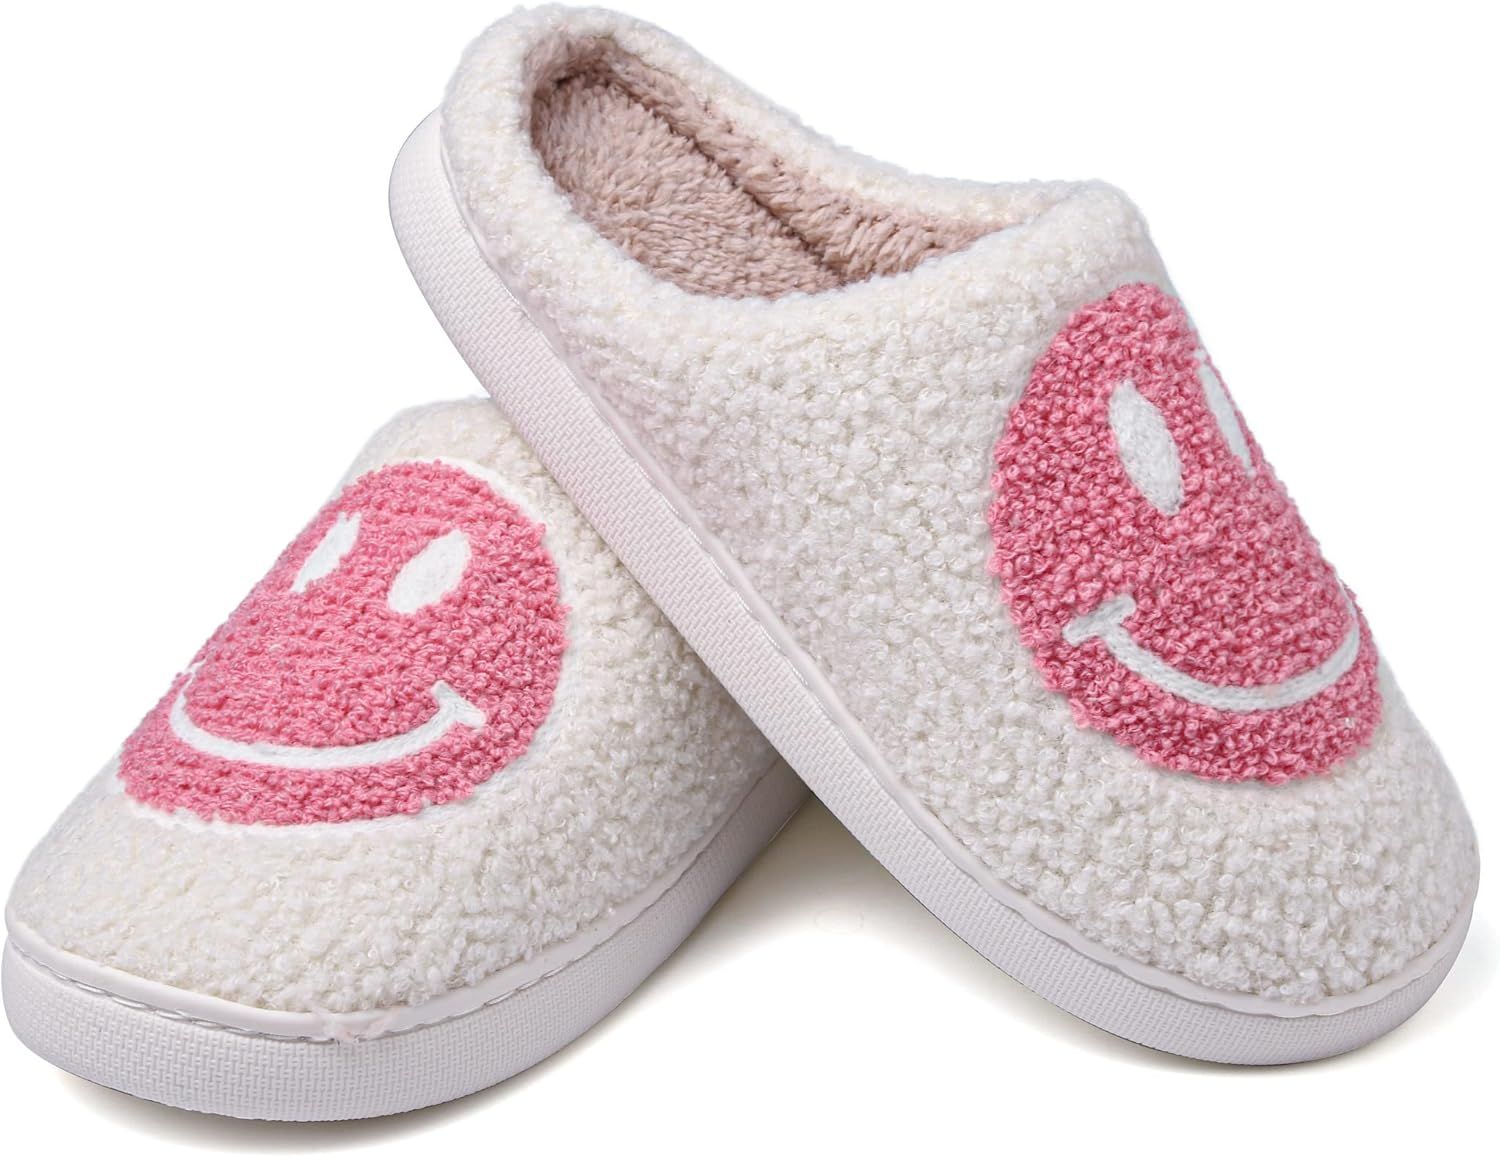 GULAKY Smiley Face Slippers for Women and Men House Shoes Fuzzy Non-slip Cozy Lightweight Slip-on... | Amazon (US)